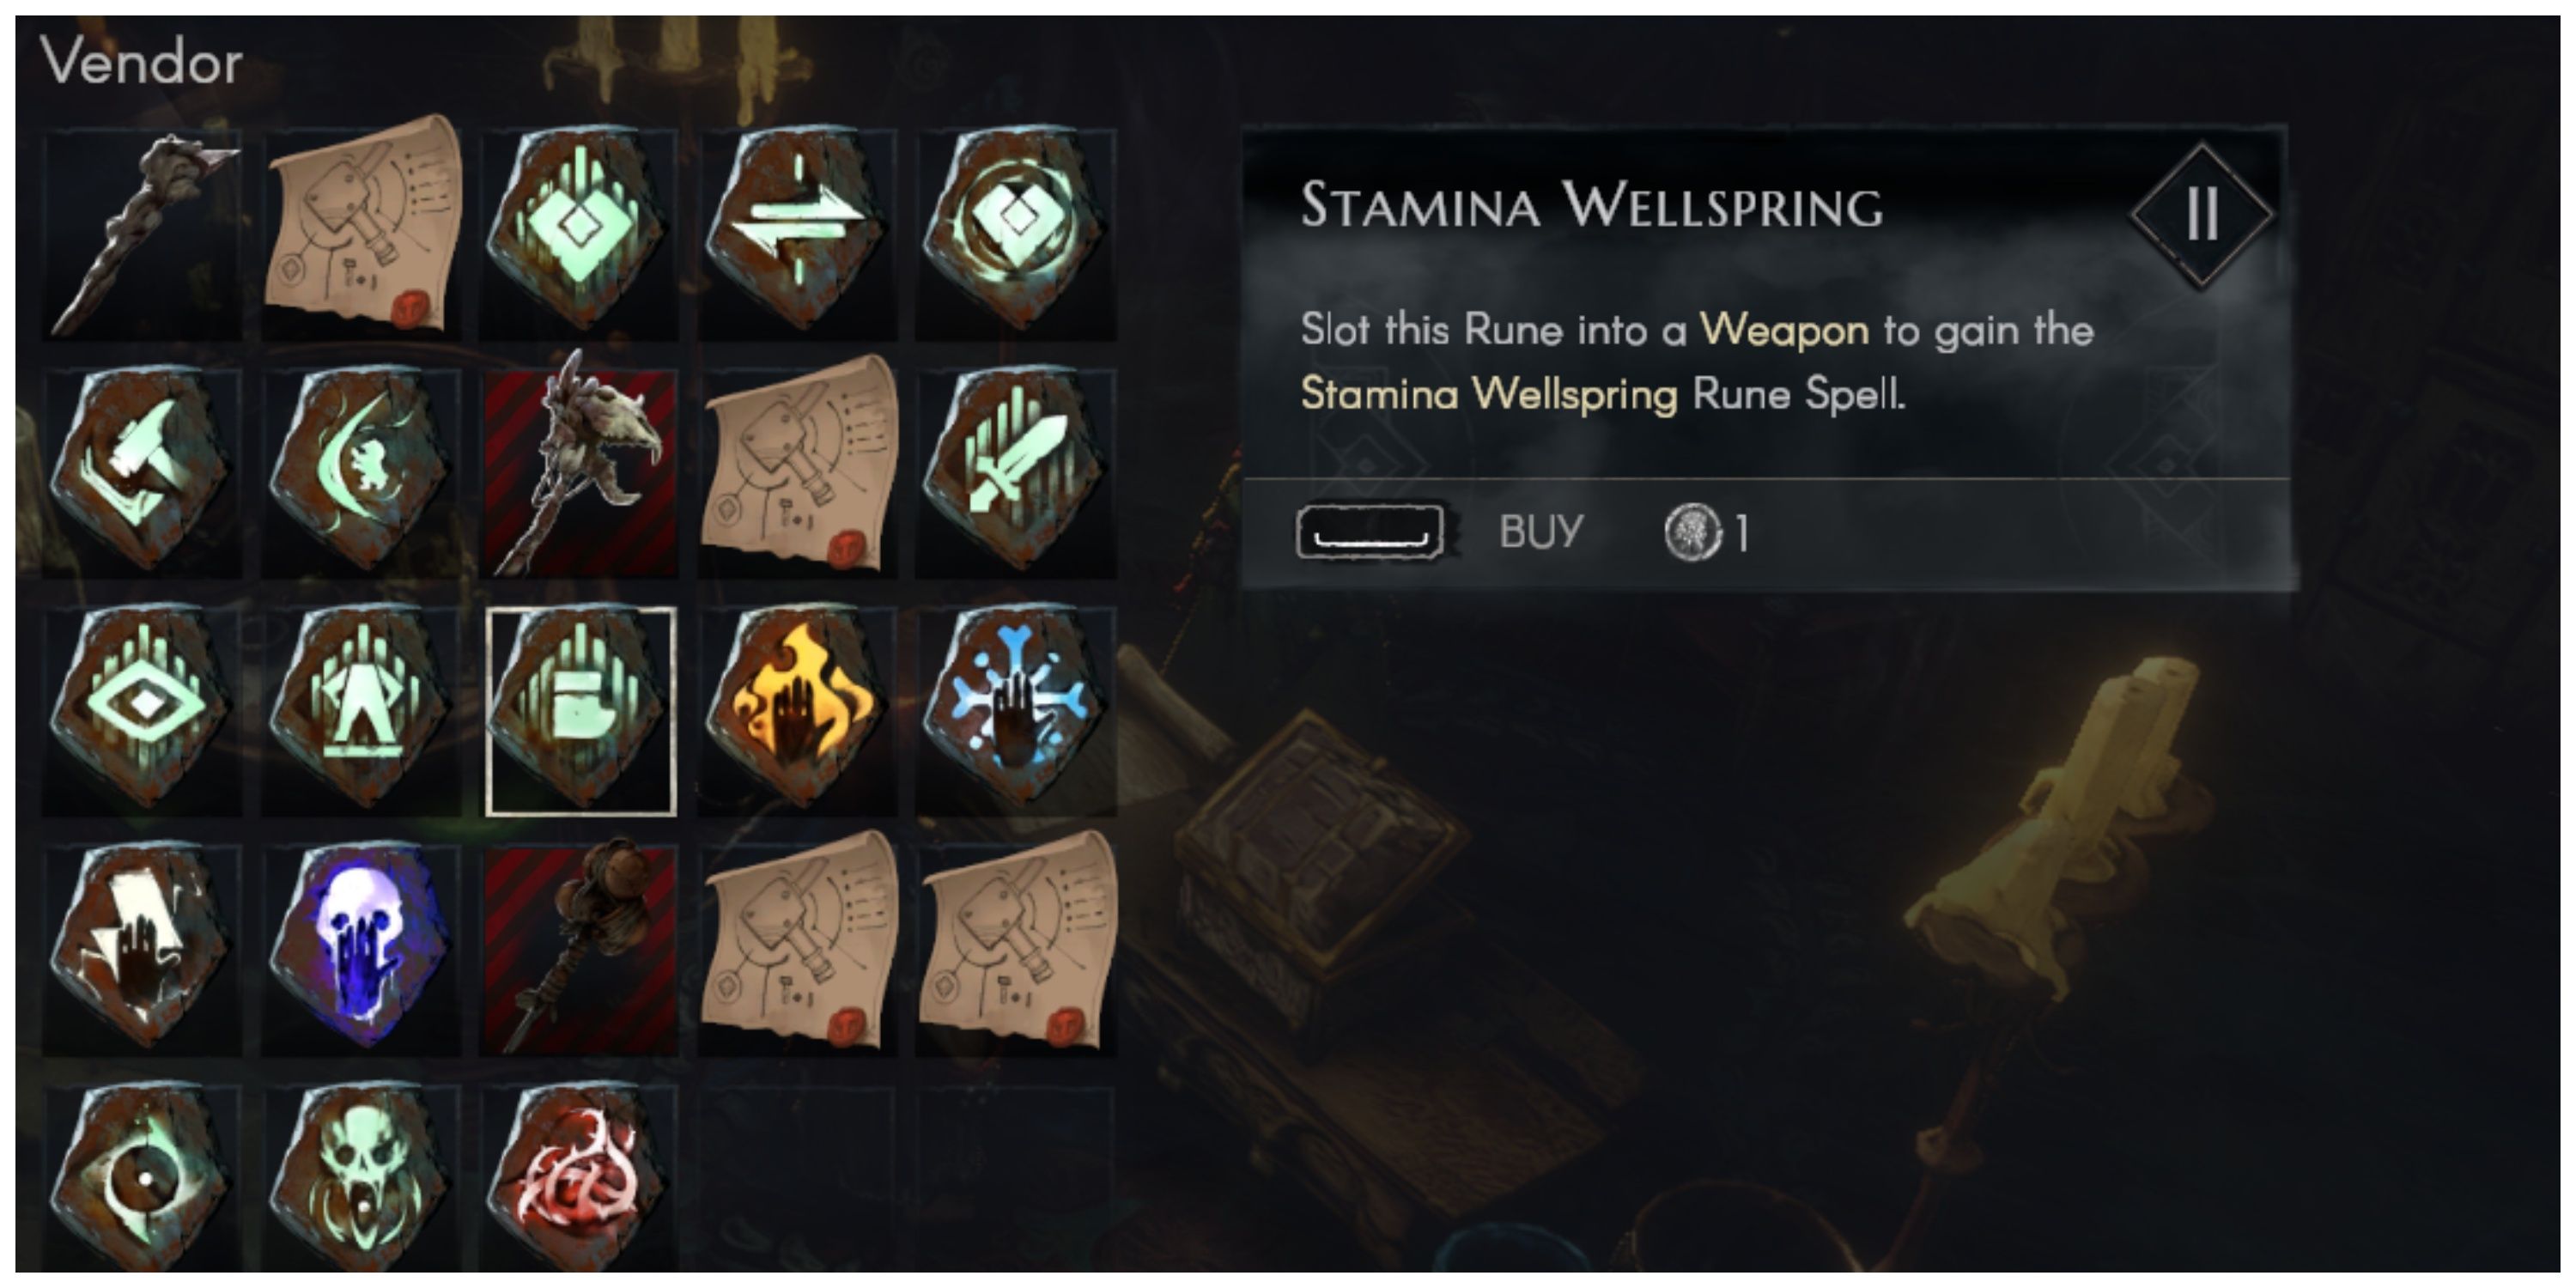 No Rest For The Wicked - Stamina Wellspring Rune